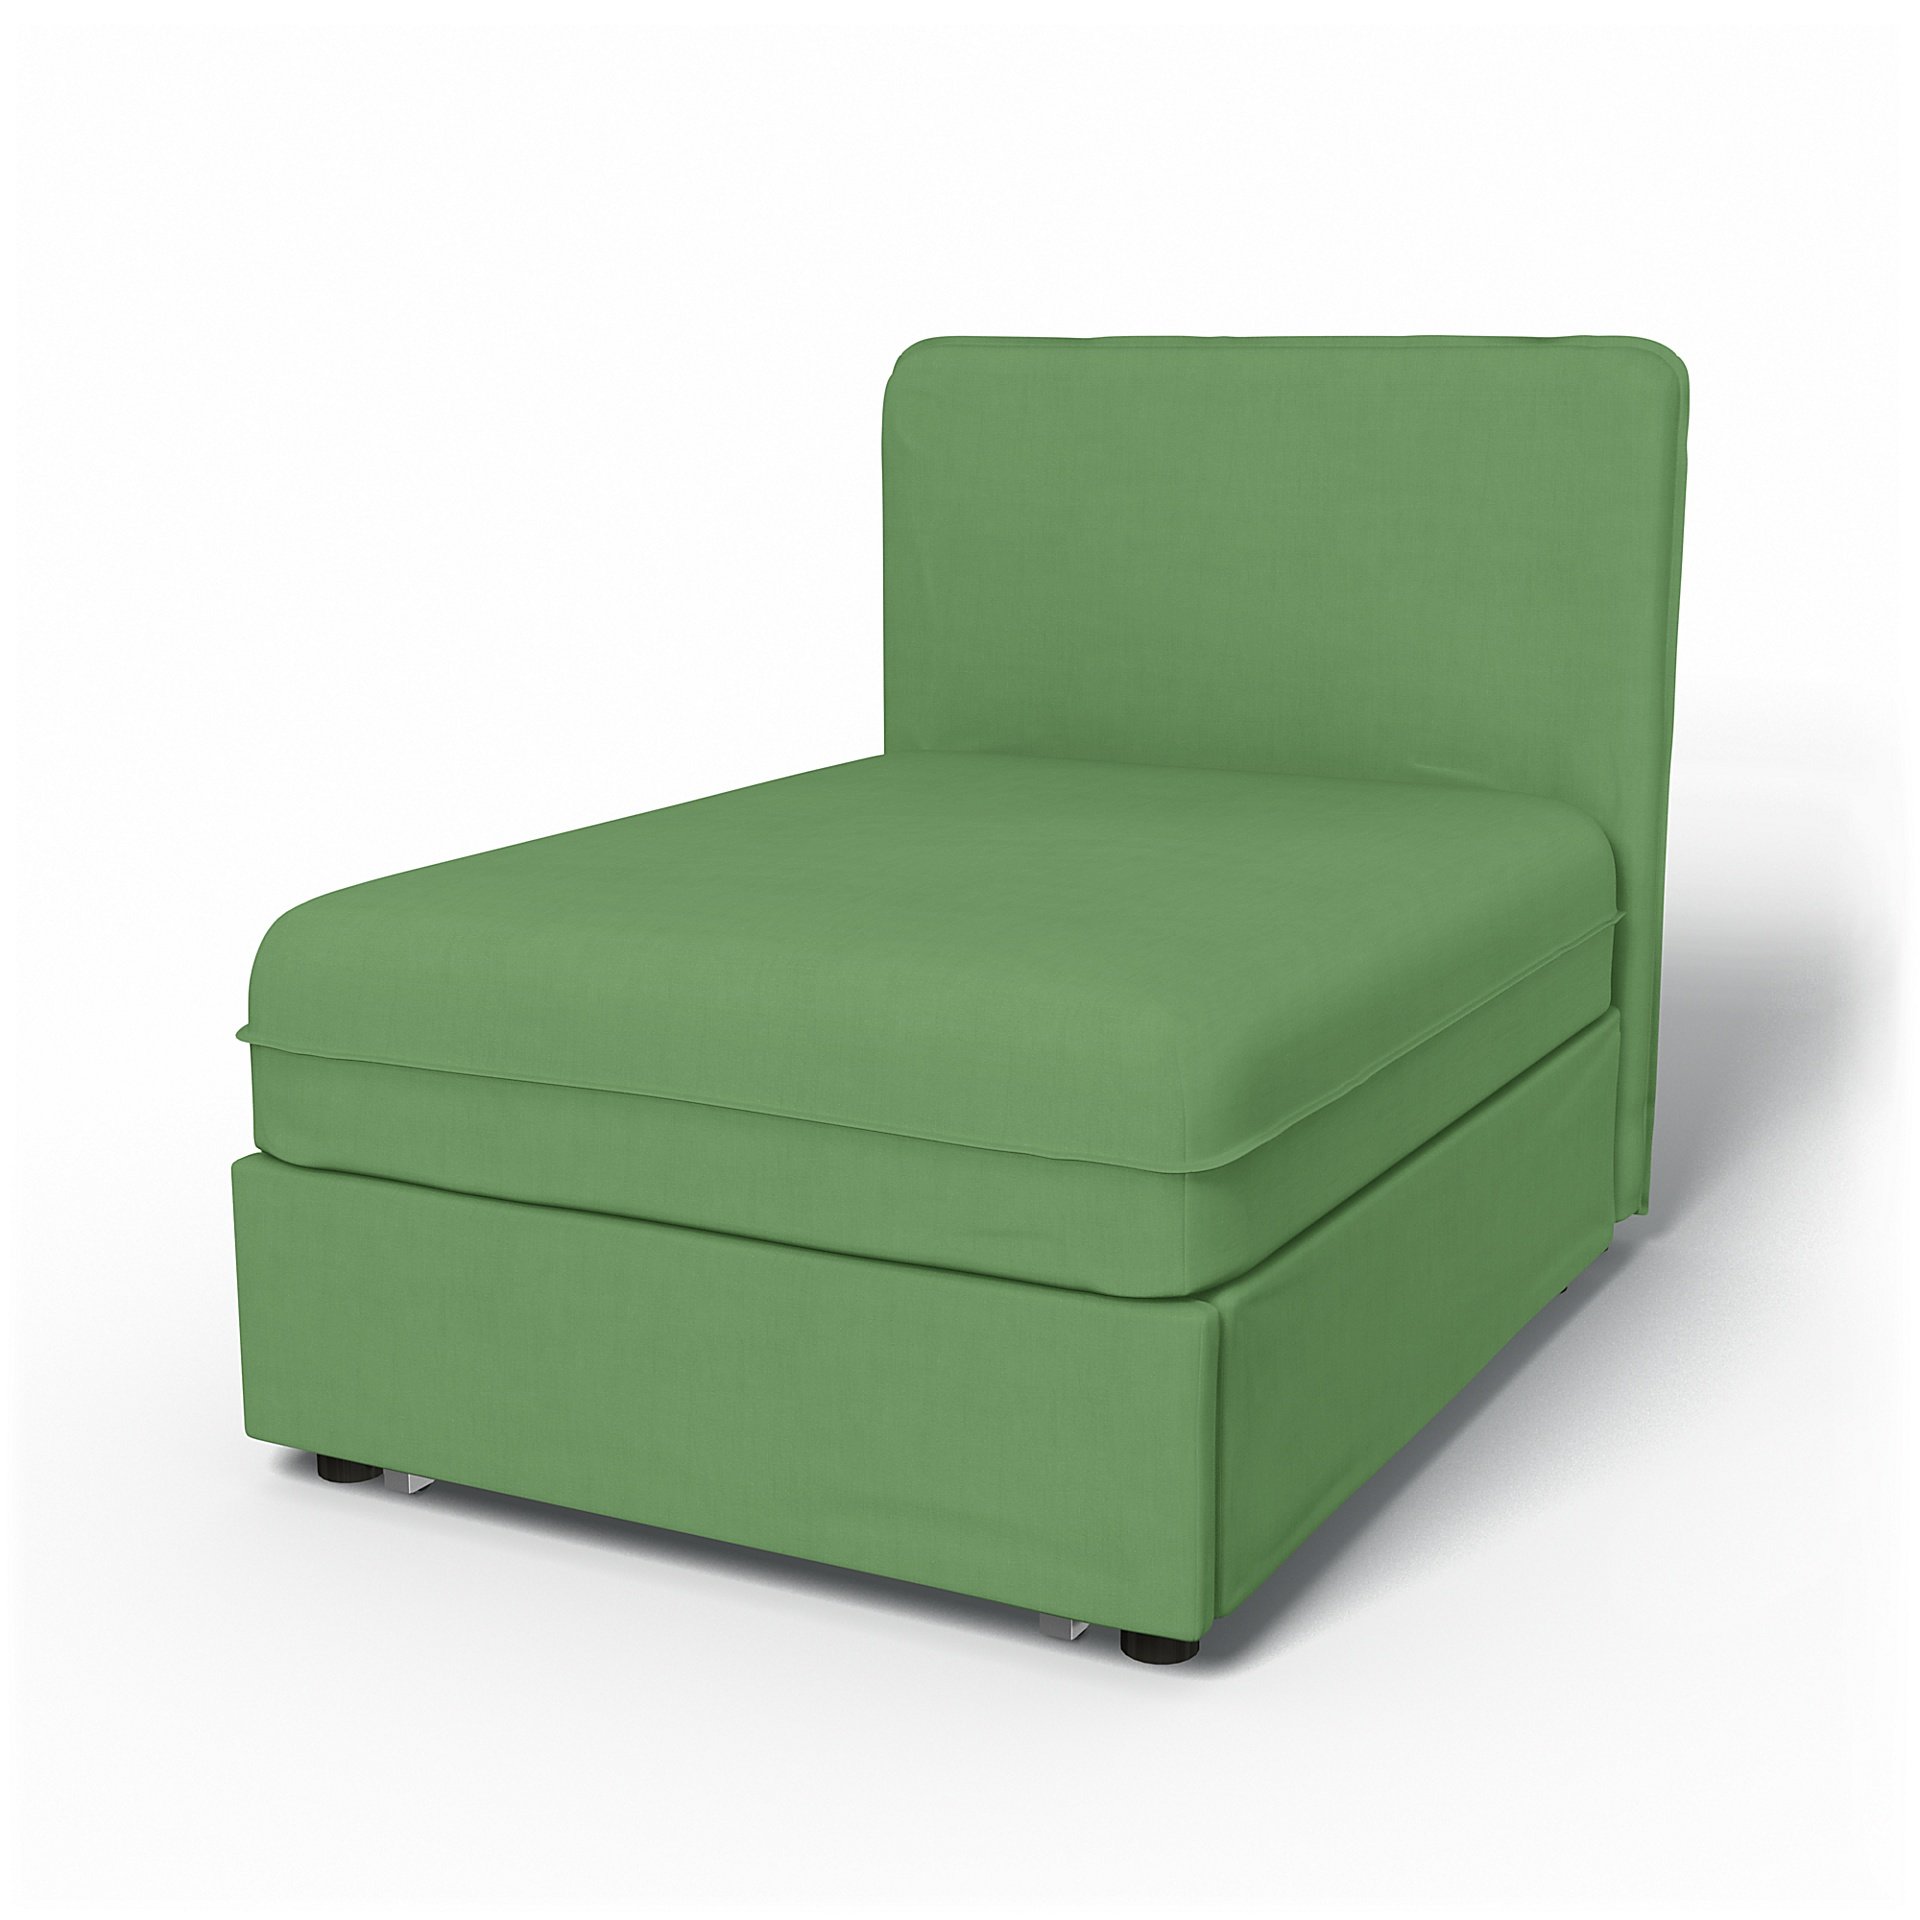 IKEA - Vallentuna Seat Module with Low Back Sofa Bed Cover 80x100 cm 32x39in, Apple Green, Linen - B